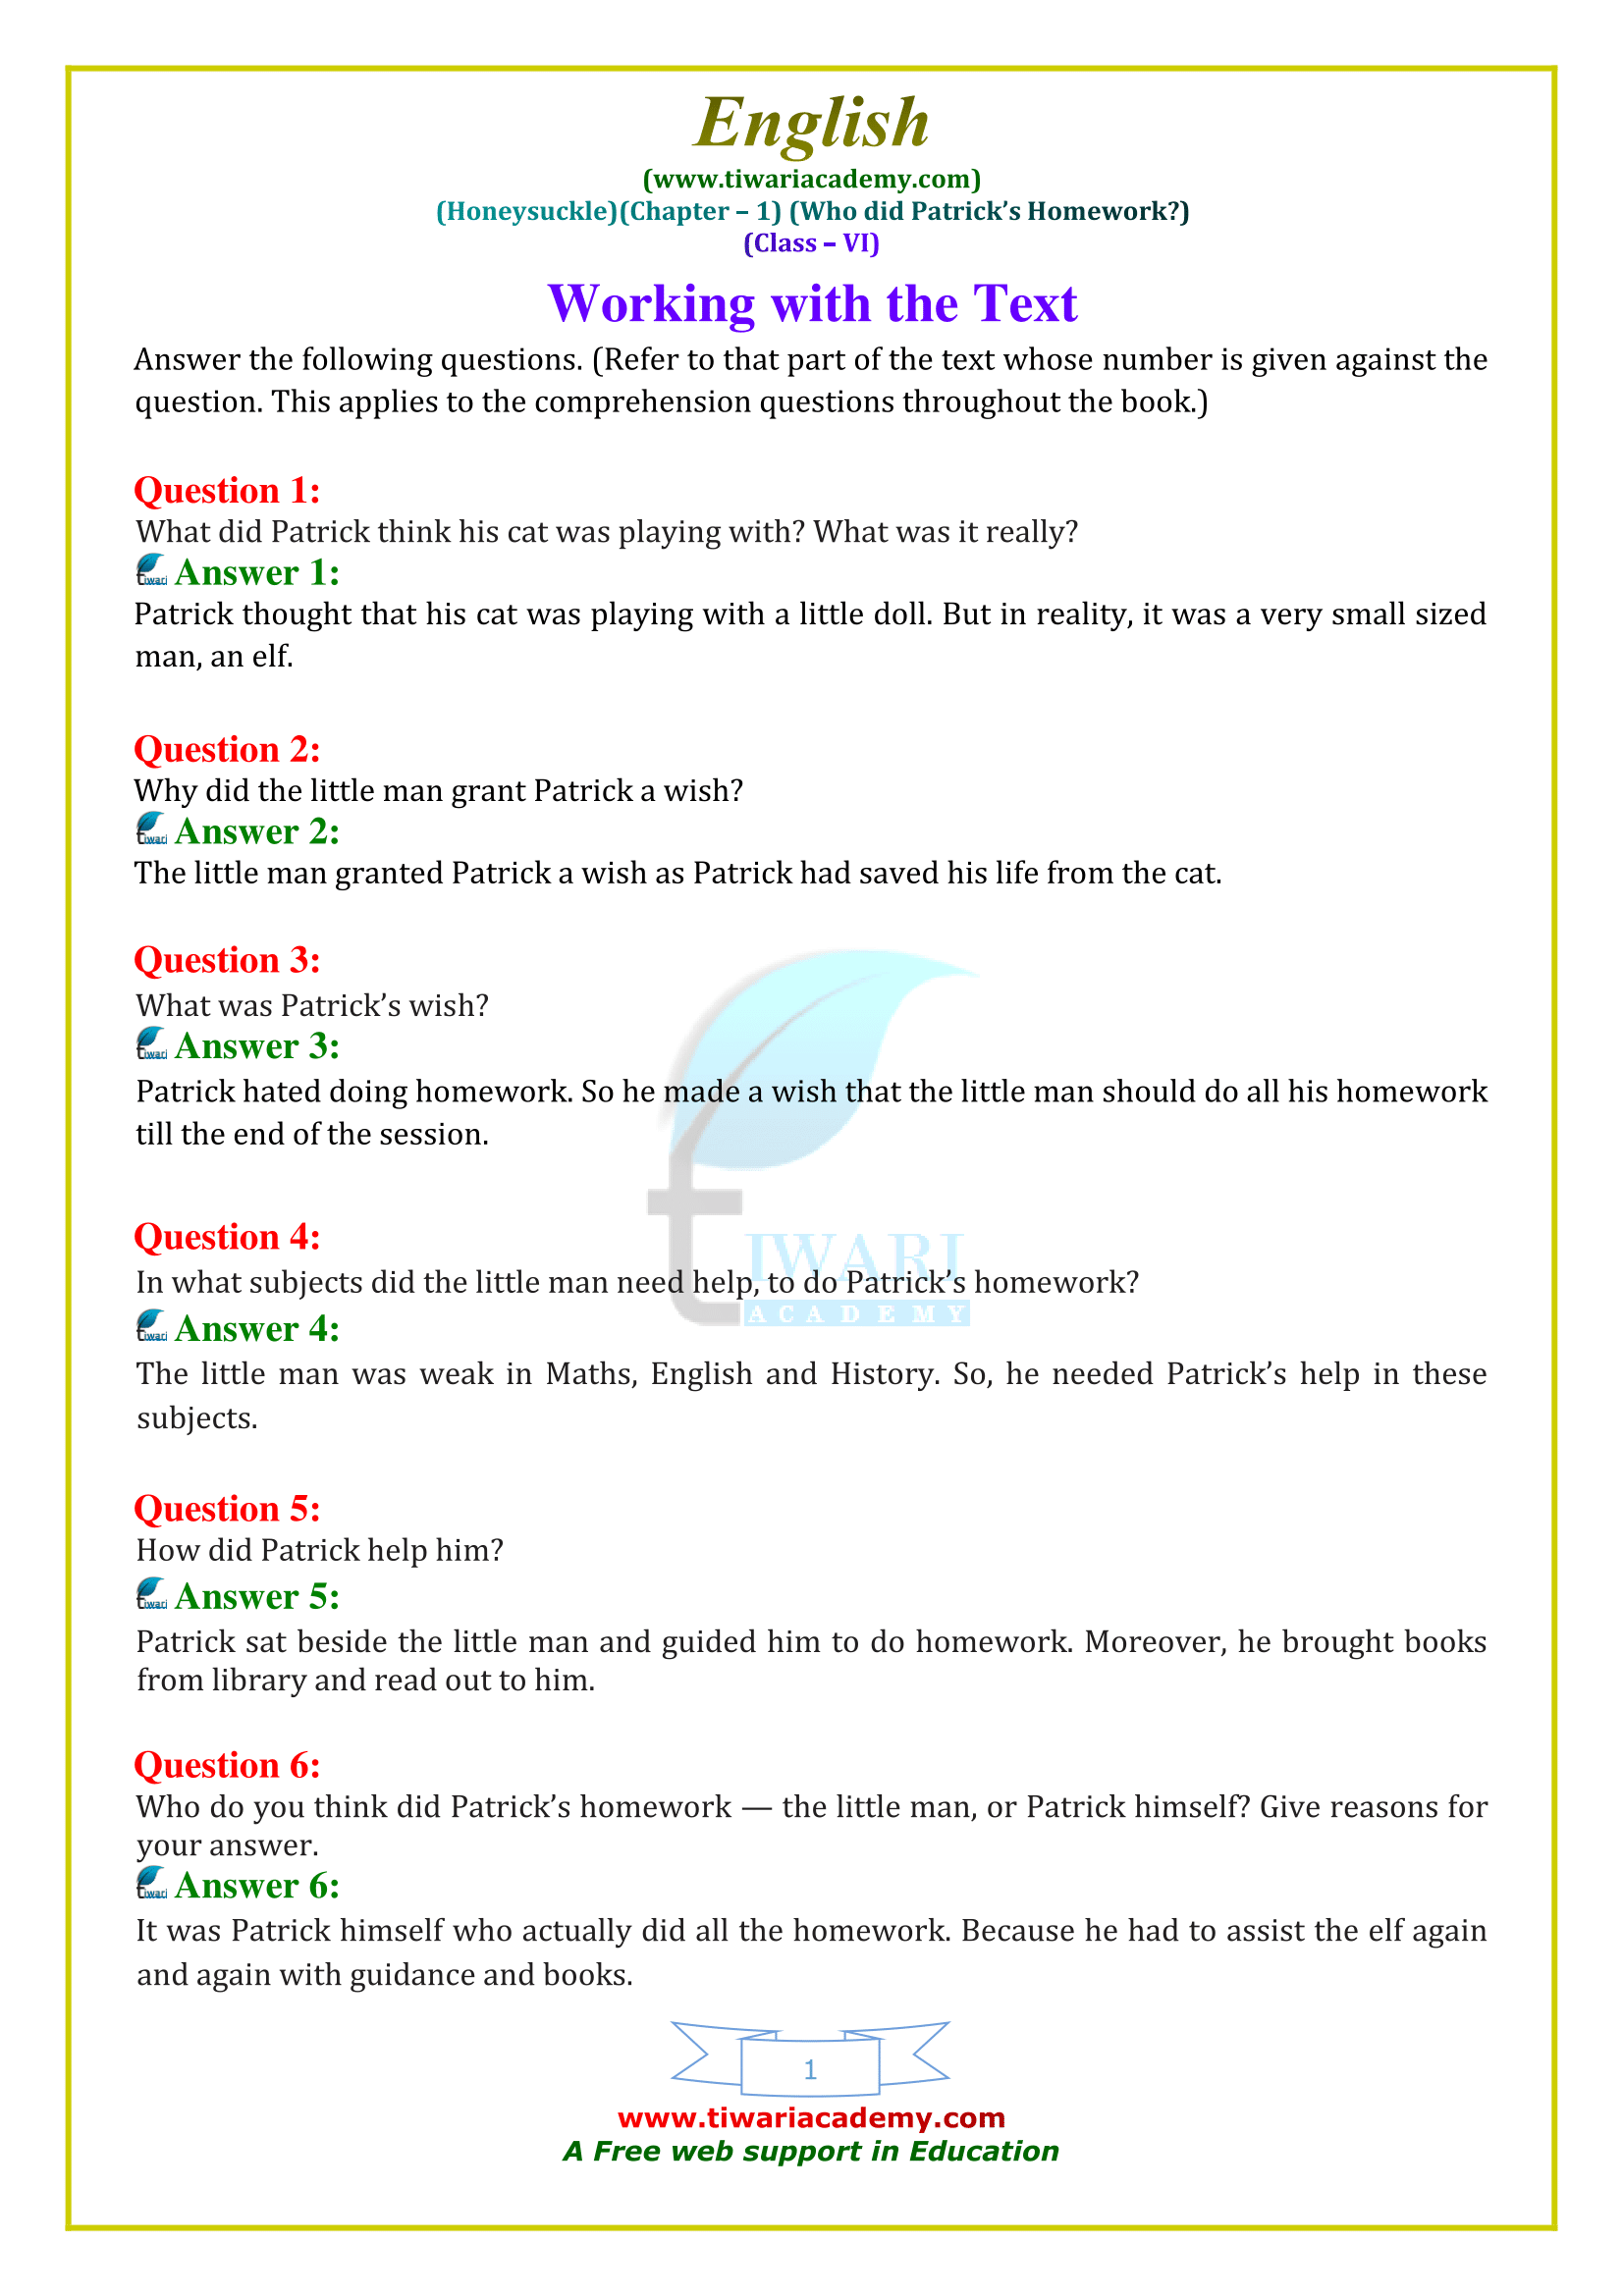 NCERT Solutions for Class 6 English Honeysuckle Chapter 1 Who Did Patrick’s Homework?